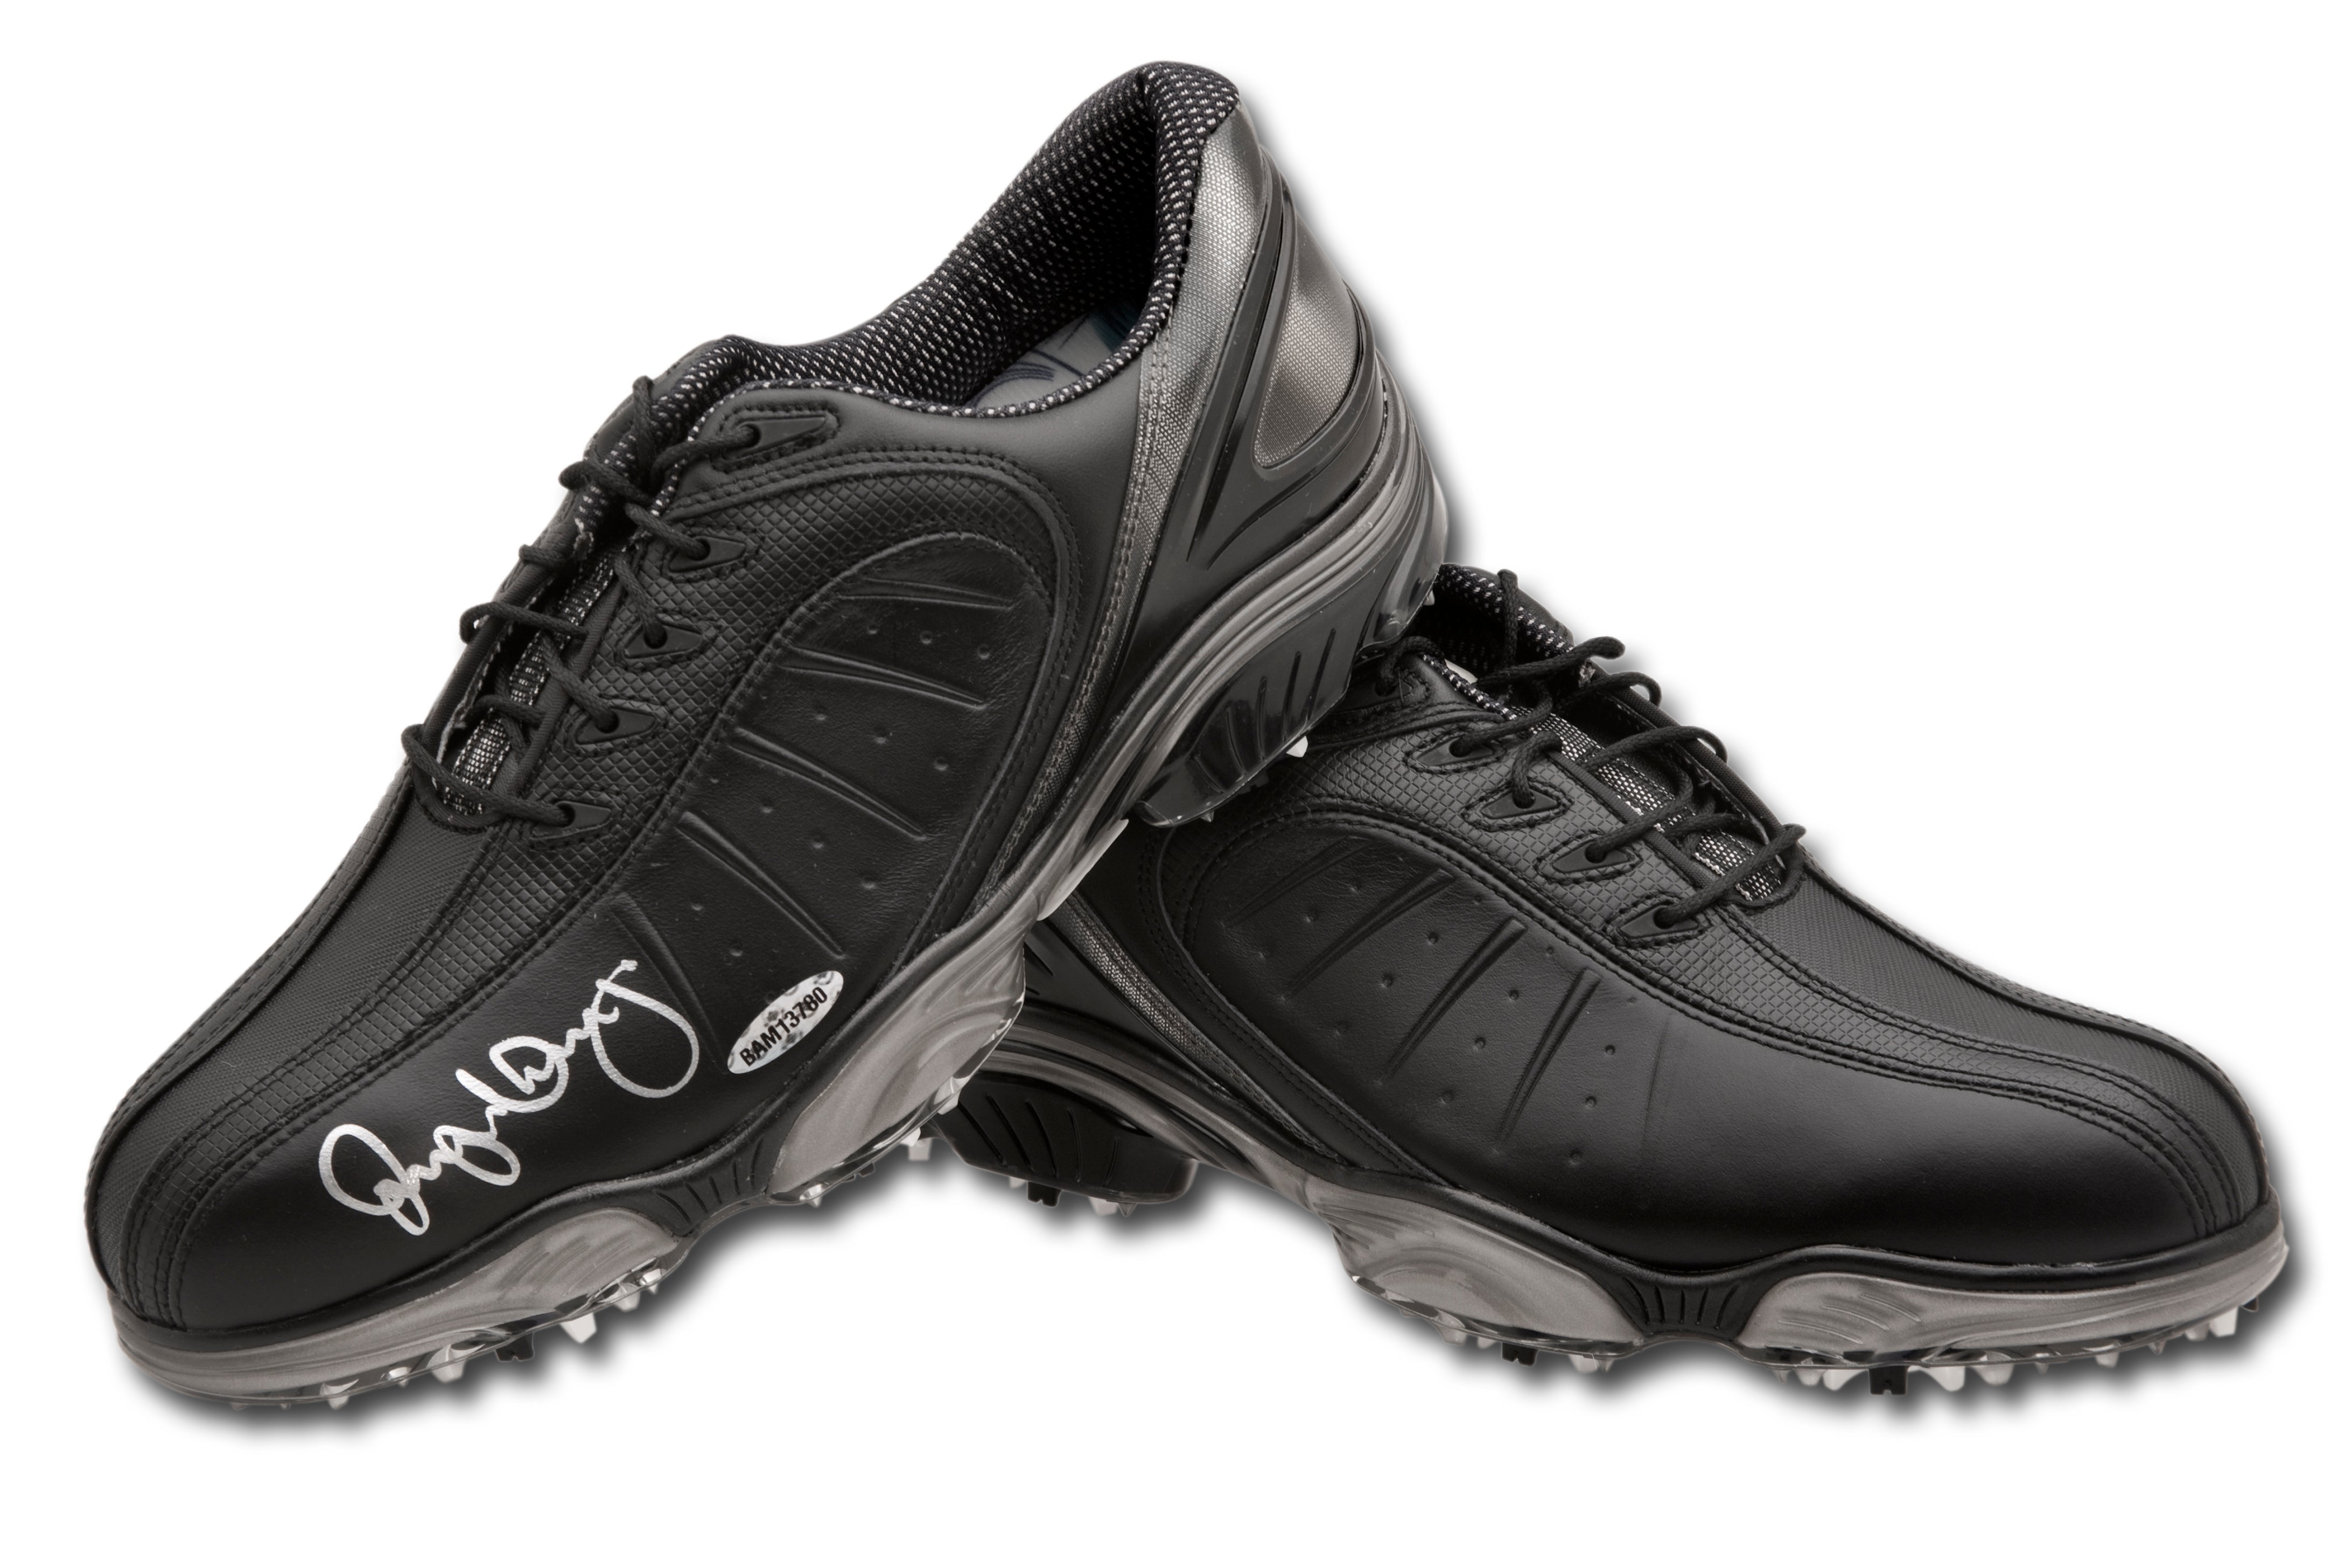 Rory Mcilroy Black Foot Joy Sport Shoes Autograph by Fathead | Wood